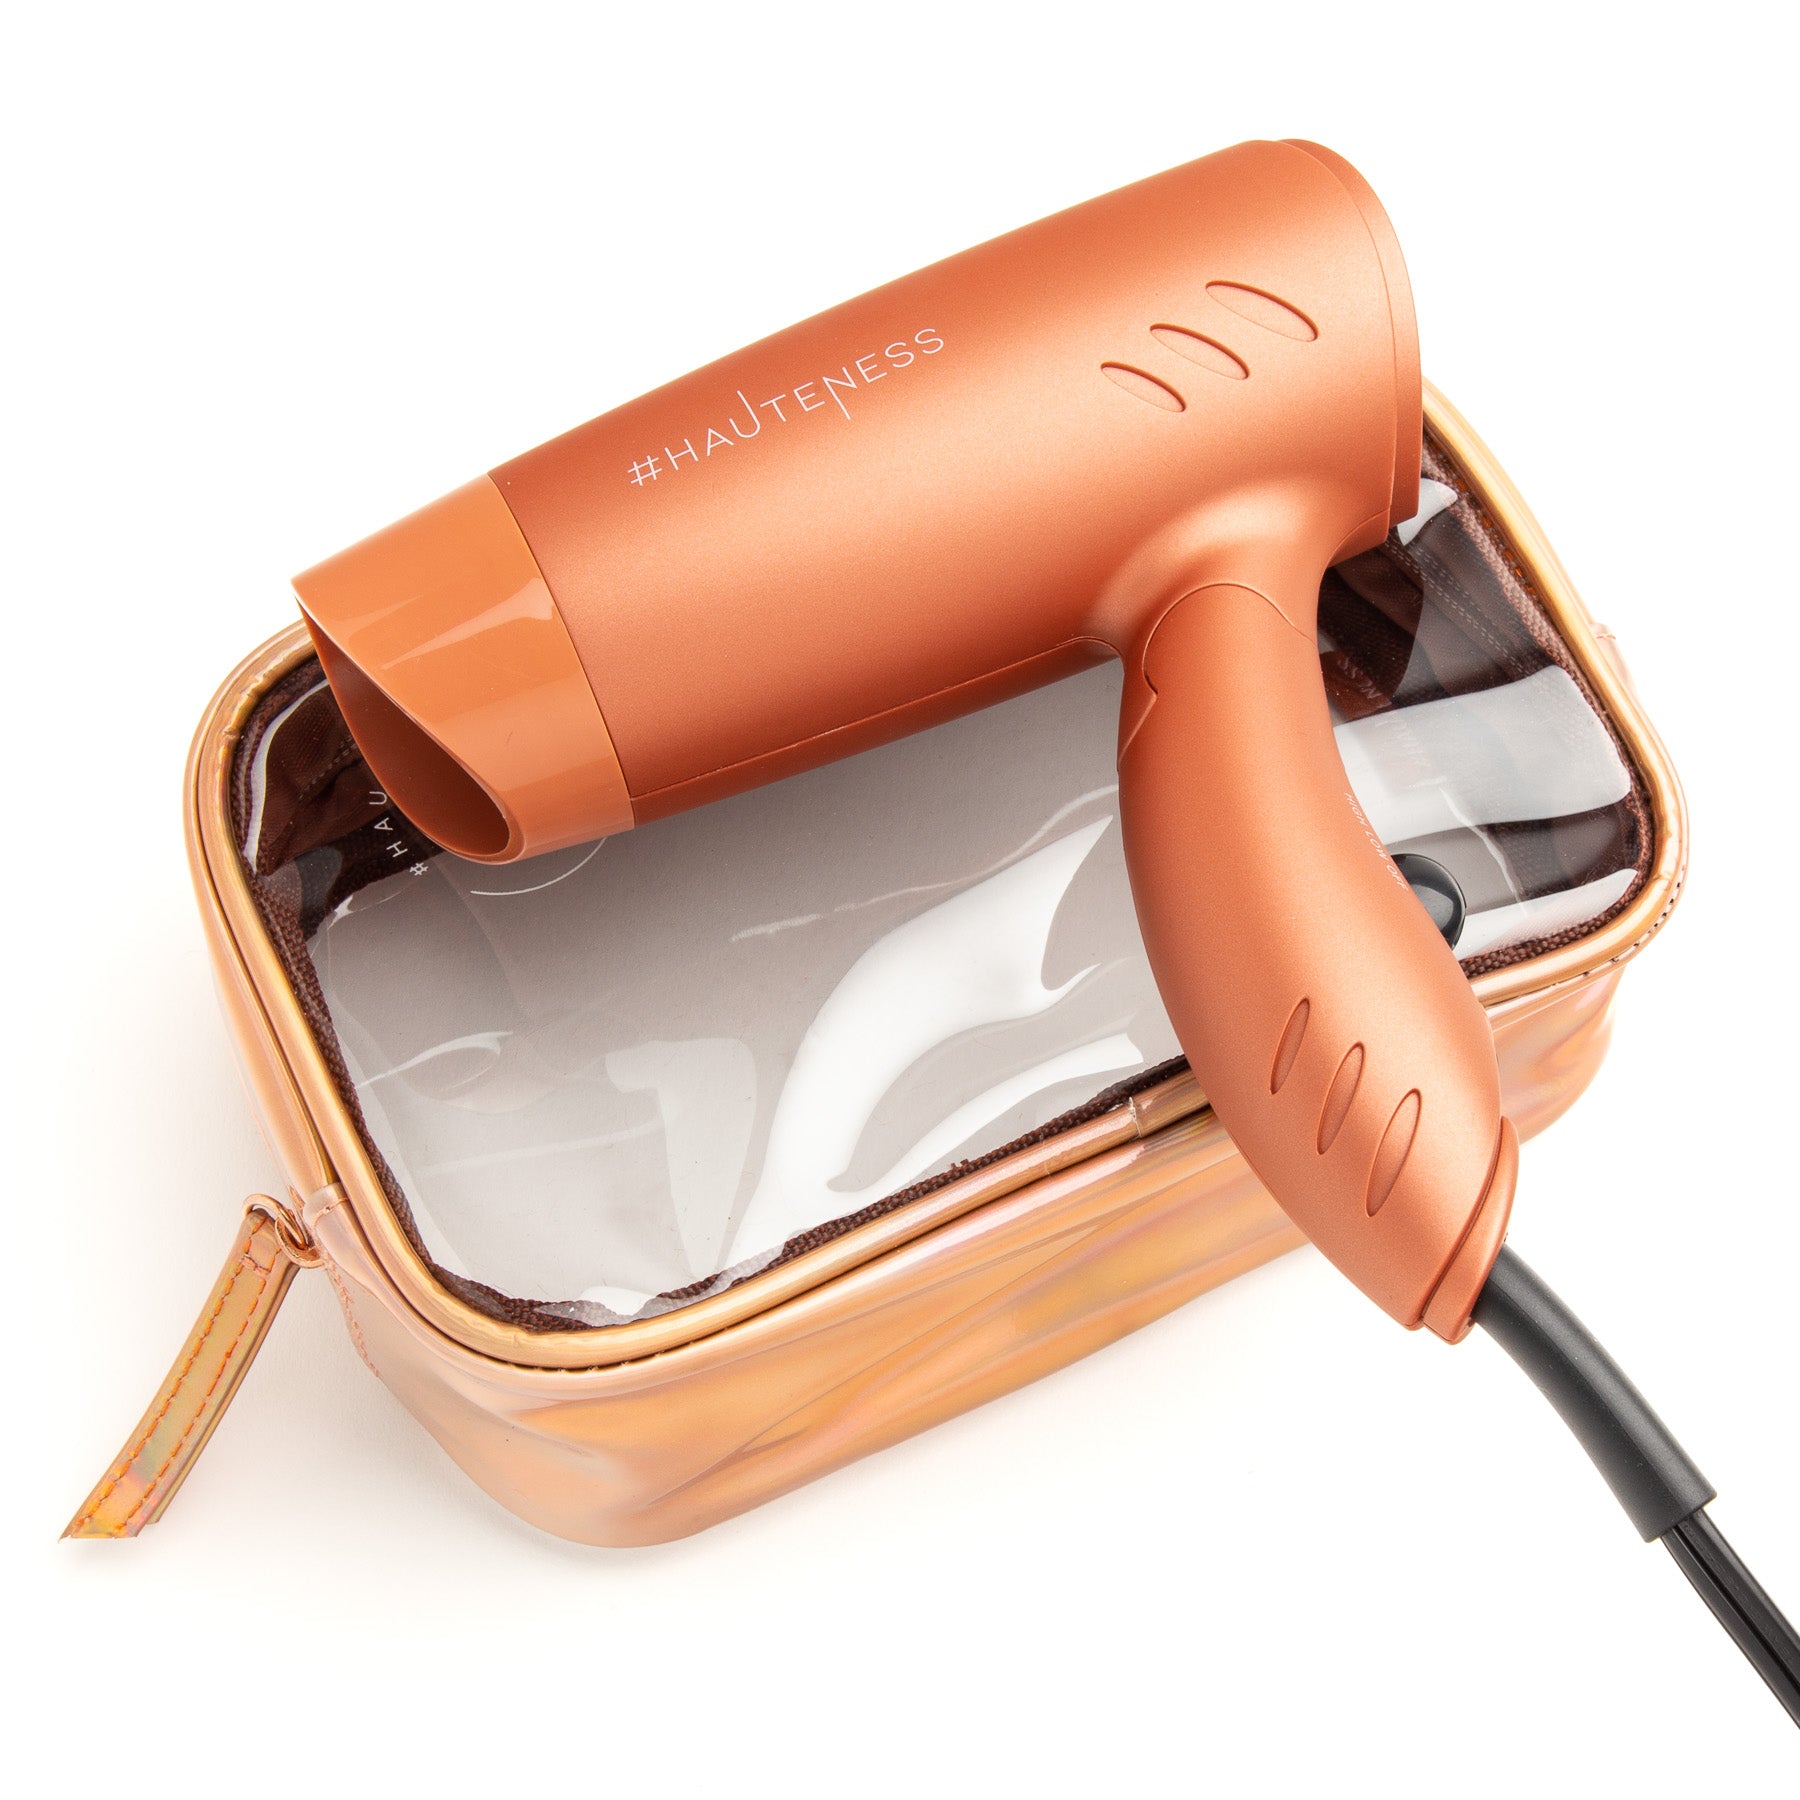 Mighty Mini Dryer (with Travel Bag Included) - Copper